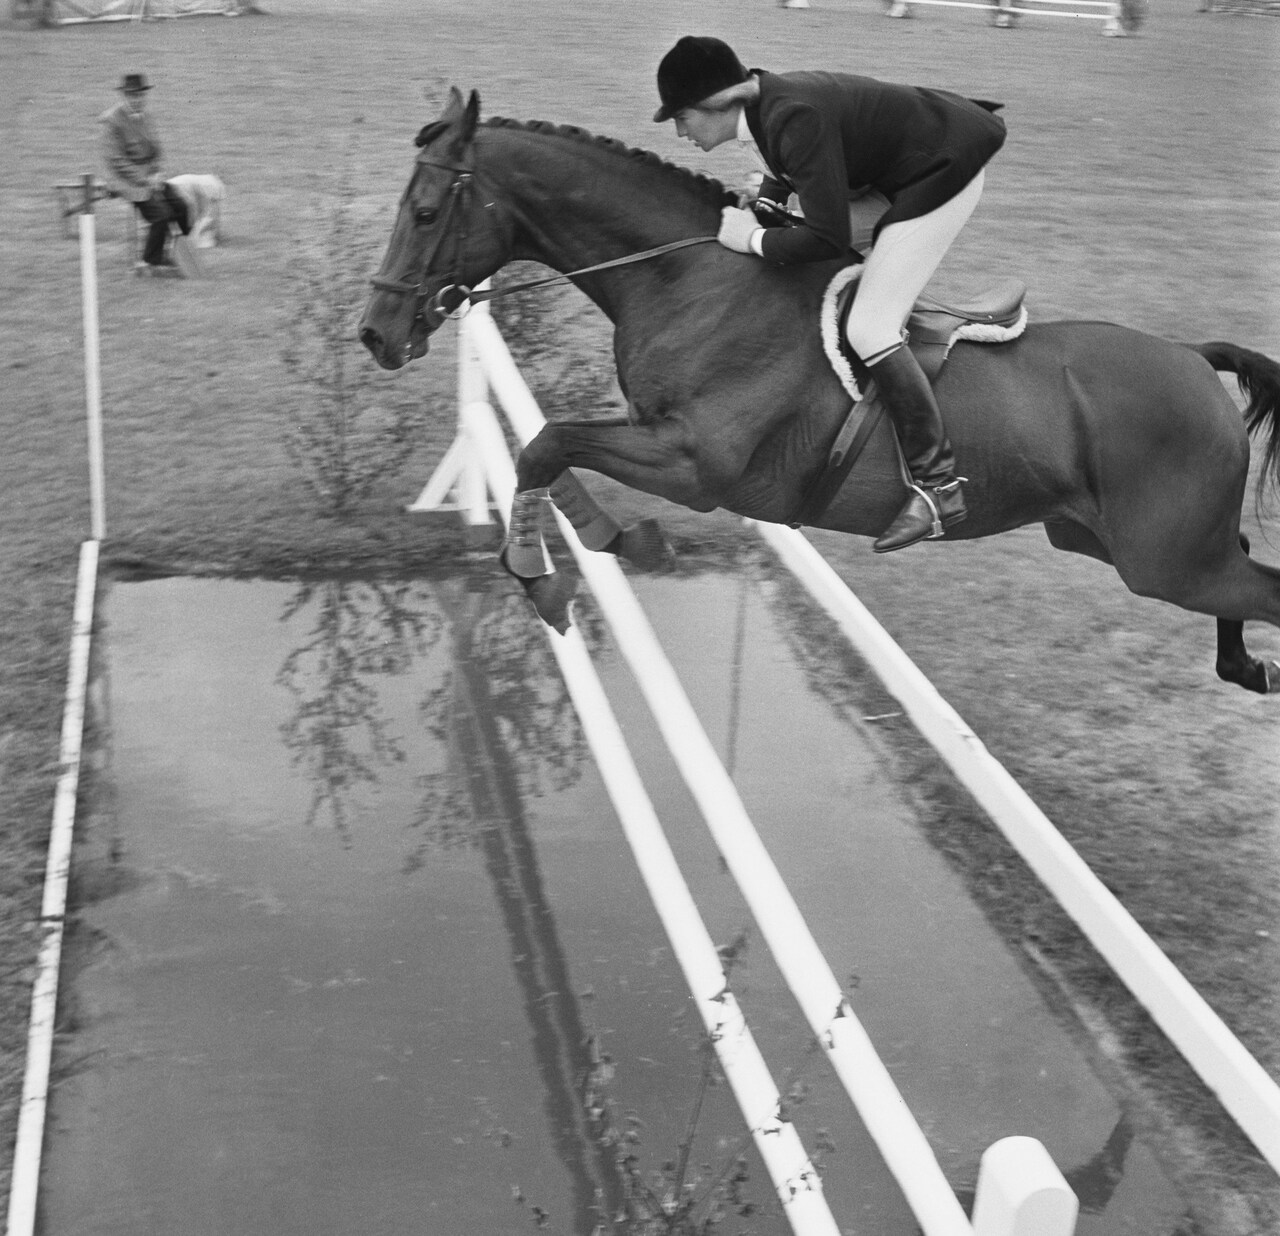 Anneli Drummond-Hay on the equine love of her life, Merely-A-Monarch, in 1963